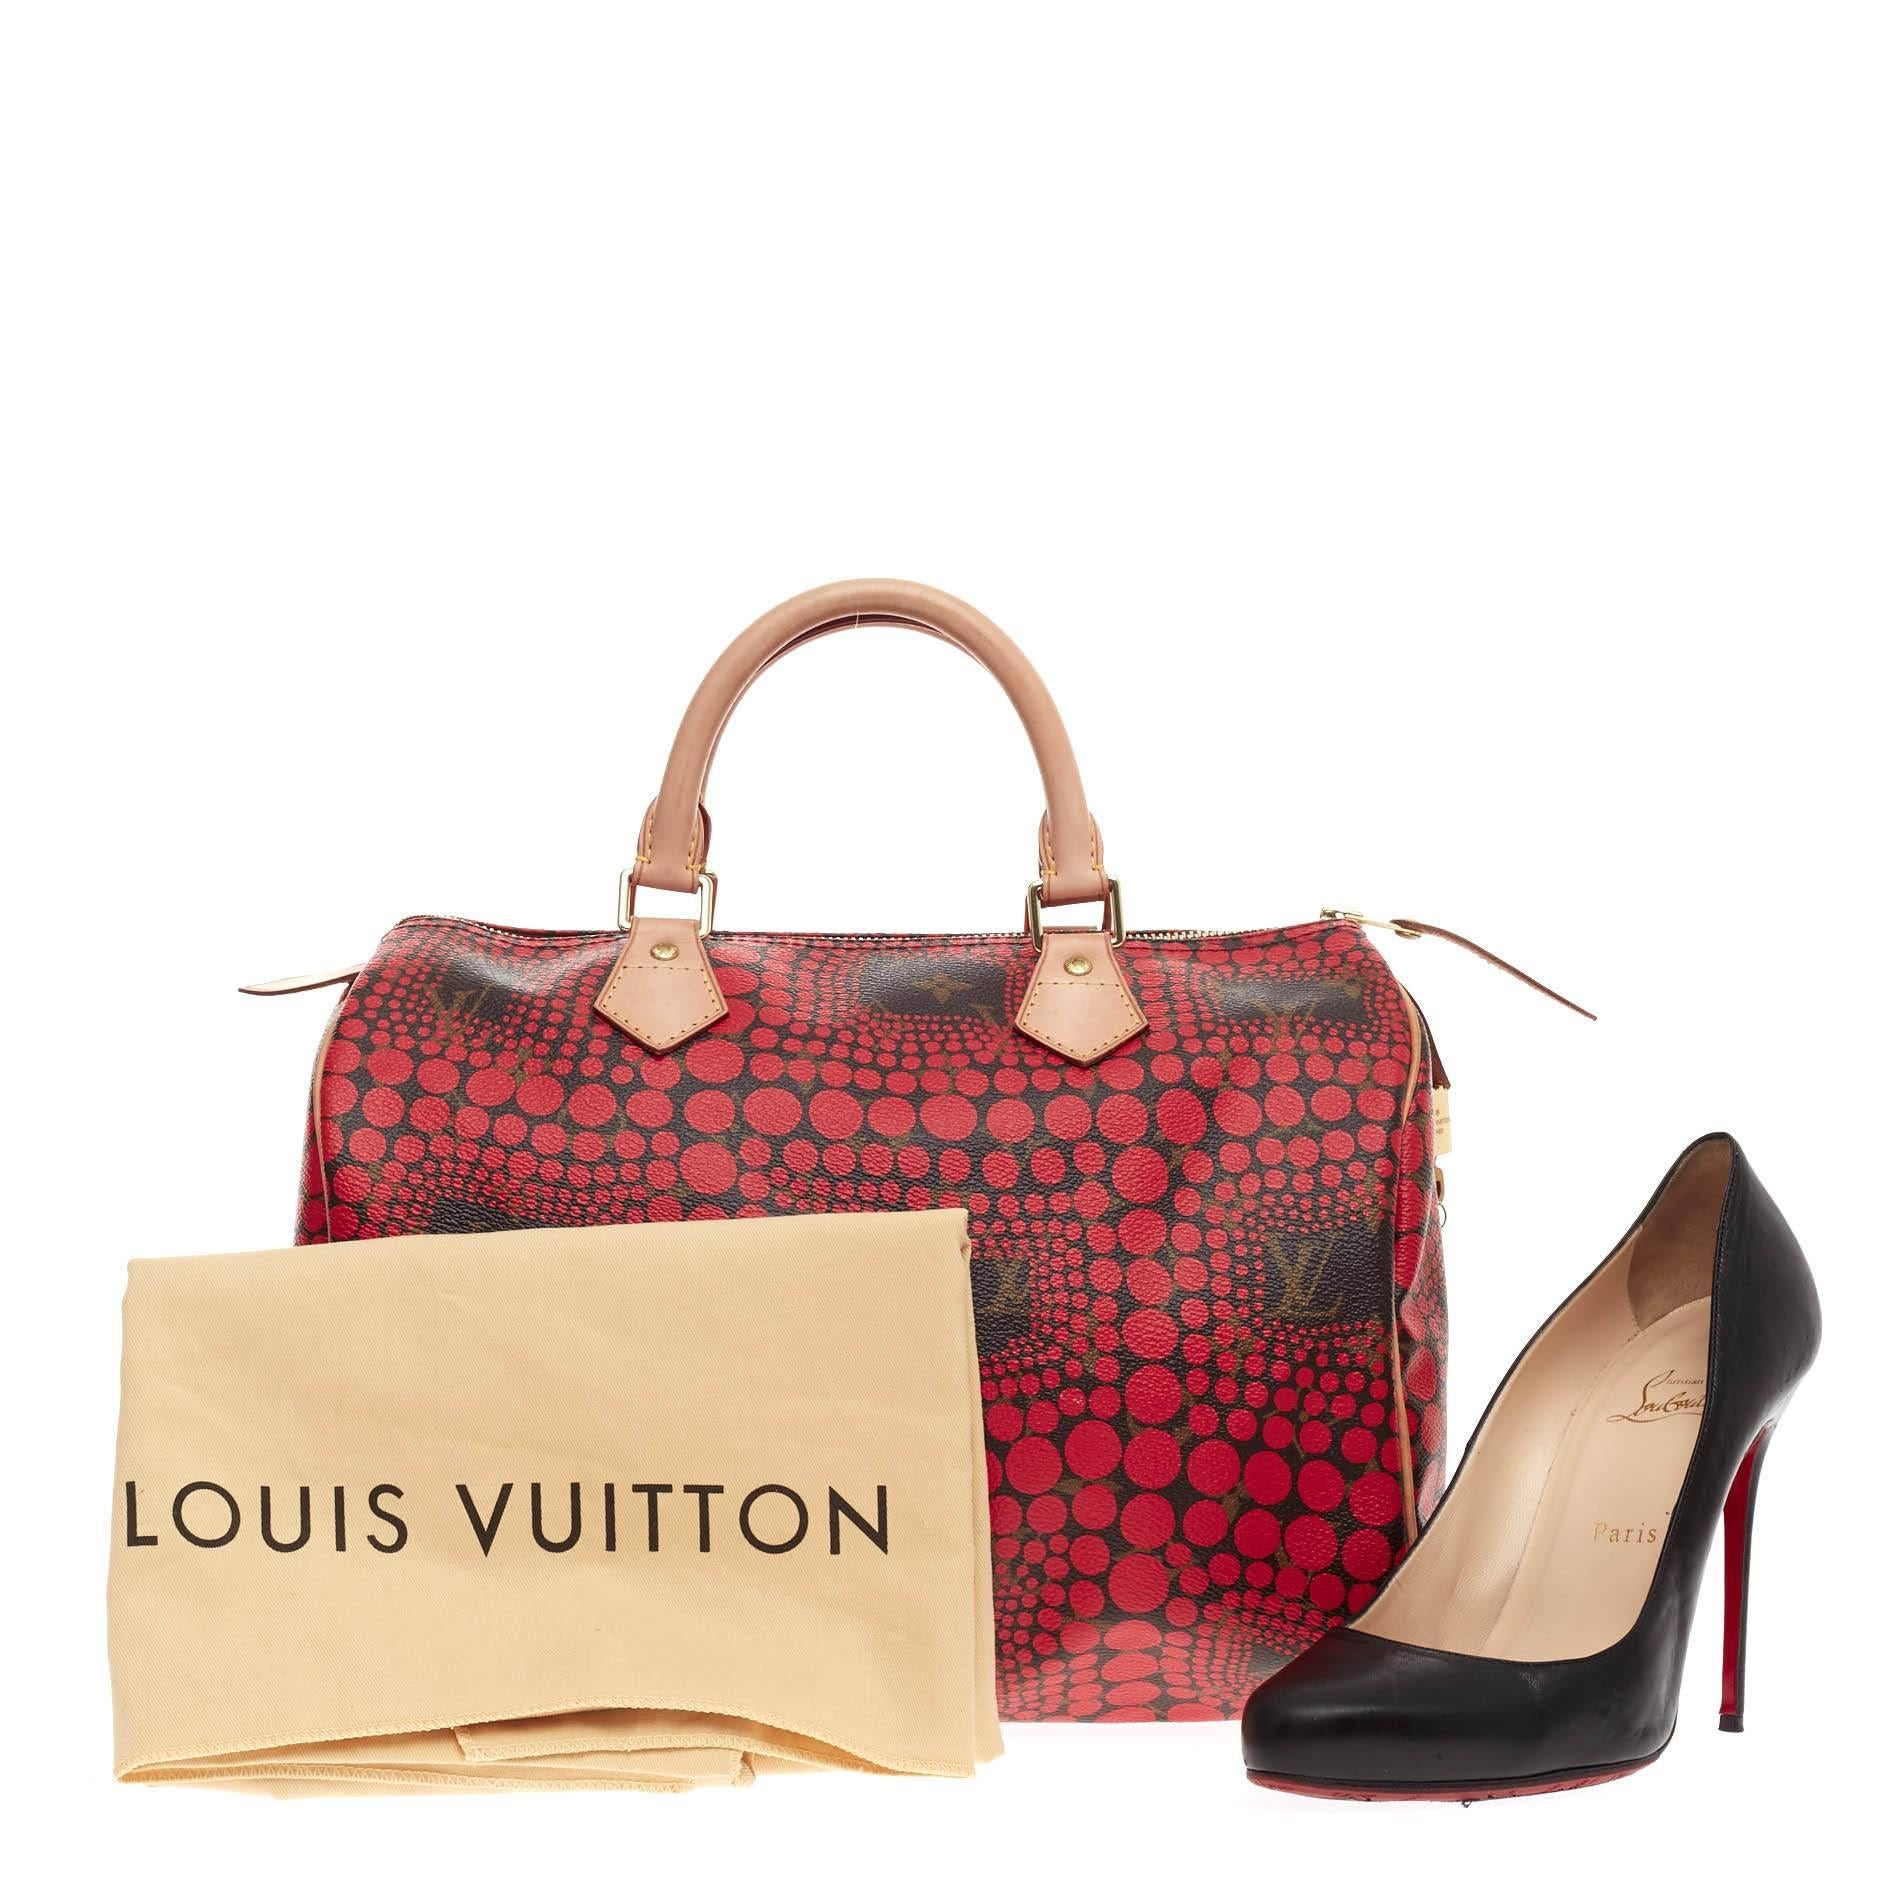 This authentic Louis Vuitton Speedy Limited Edition Kusama Monogram Town Canvas 30 showcases a design created by renowned Japanese artist Yayoi Kusama. Crafted from Louis Vuitton's brown monogram printed canvas, this limited edition Speedy features